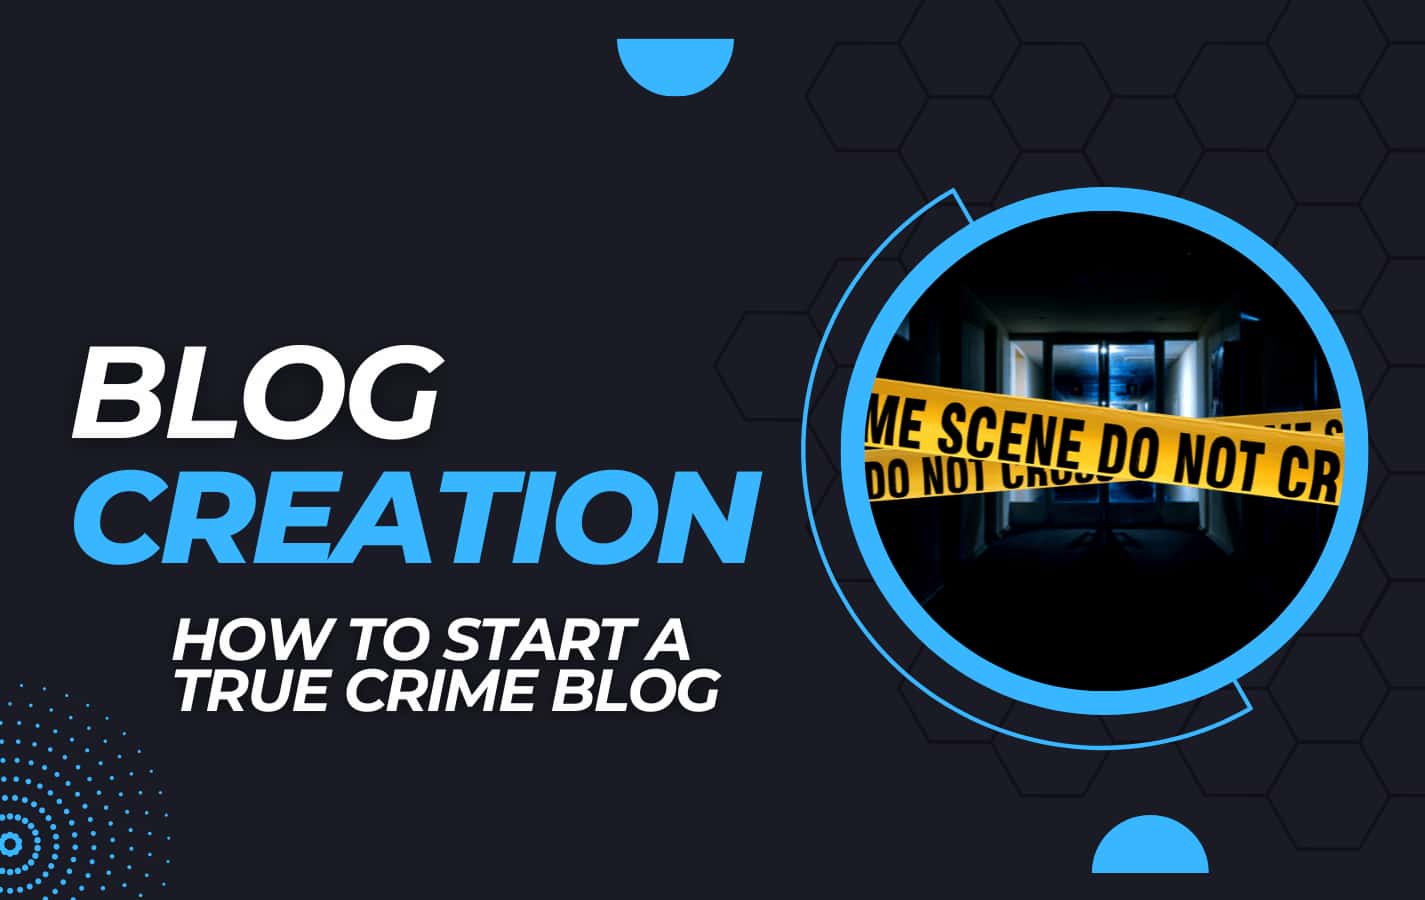 How To Start A True Crime Blog